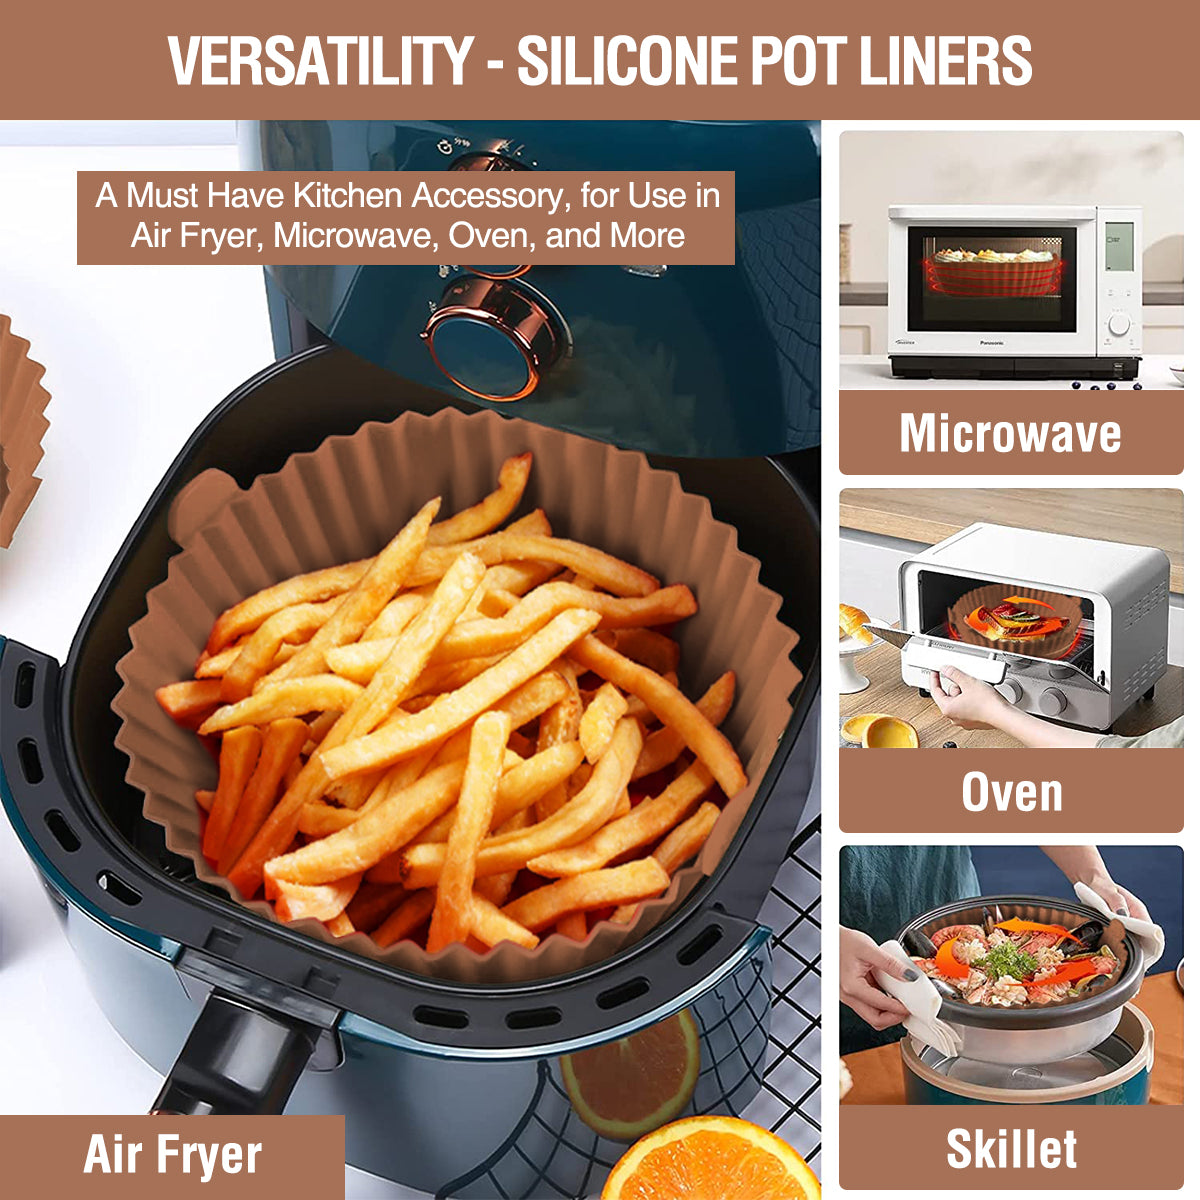 AKSDTH 2 Pack Air Fryer Silicone Liners Pot for 3 to 5 QT, Air Fryer S